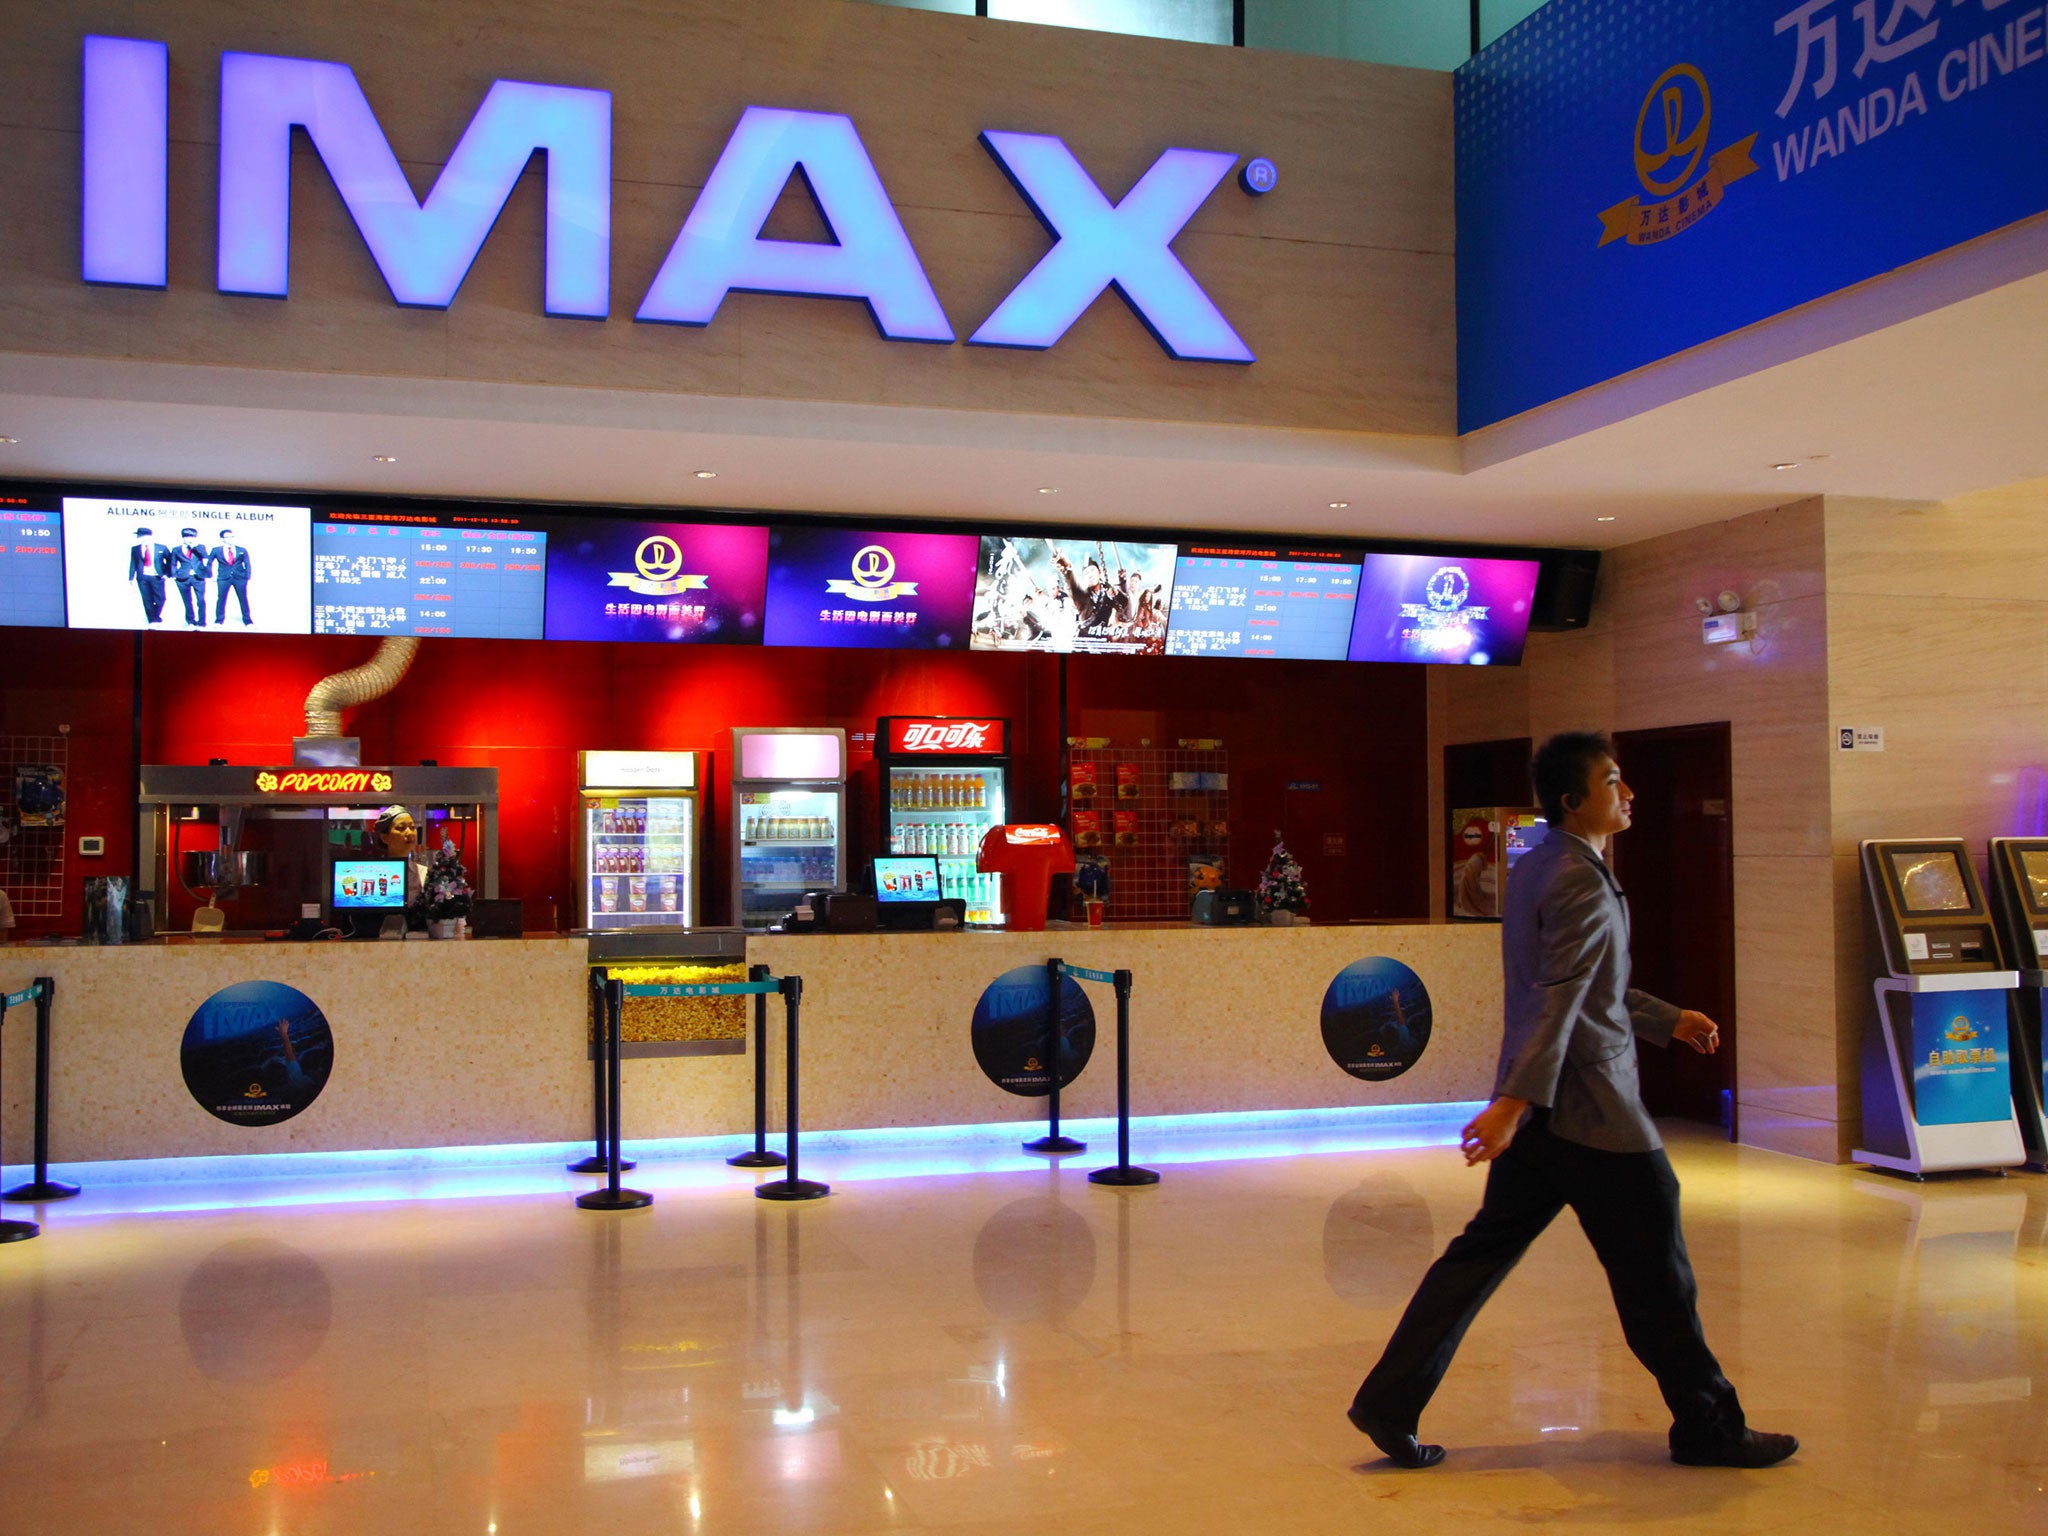 IMAX wants to attract Saudis with disposable income